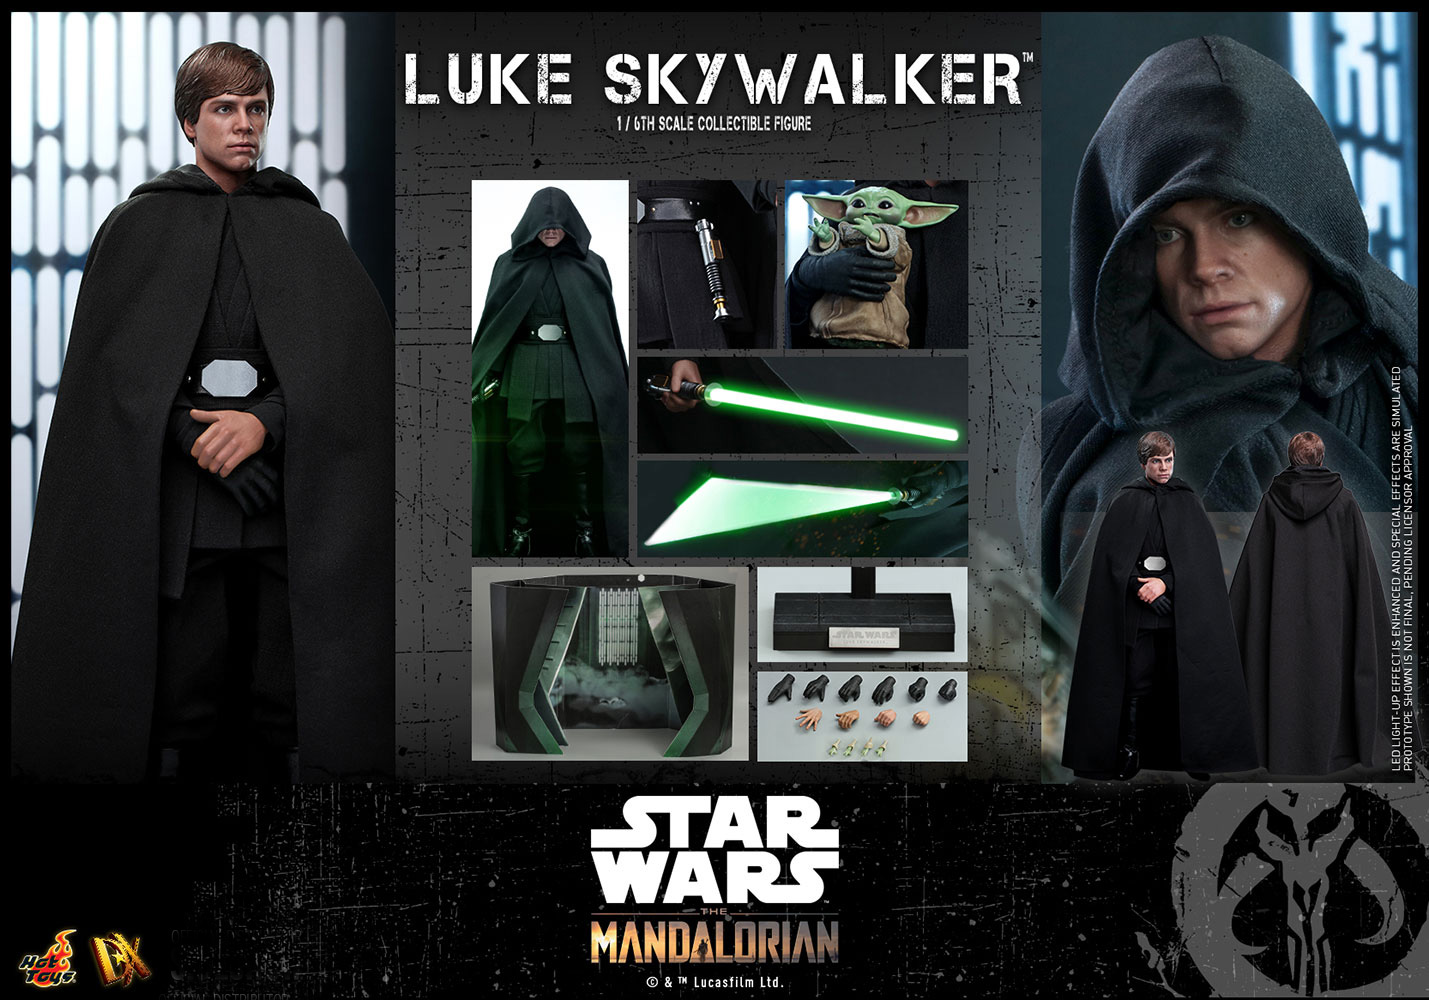 Star Wars Luke Skywalker Mandalorian Series 1/6 Scale Figure by Hot Toys - Click Image to Close